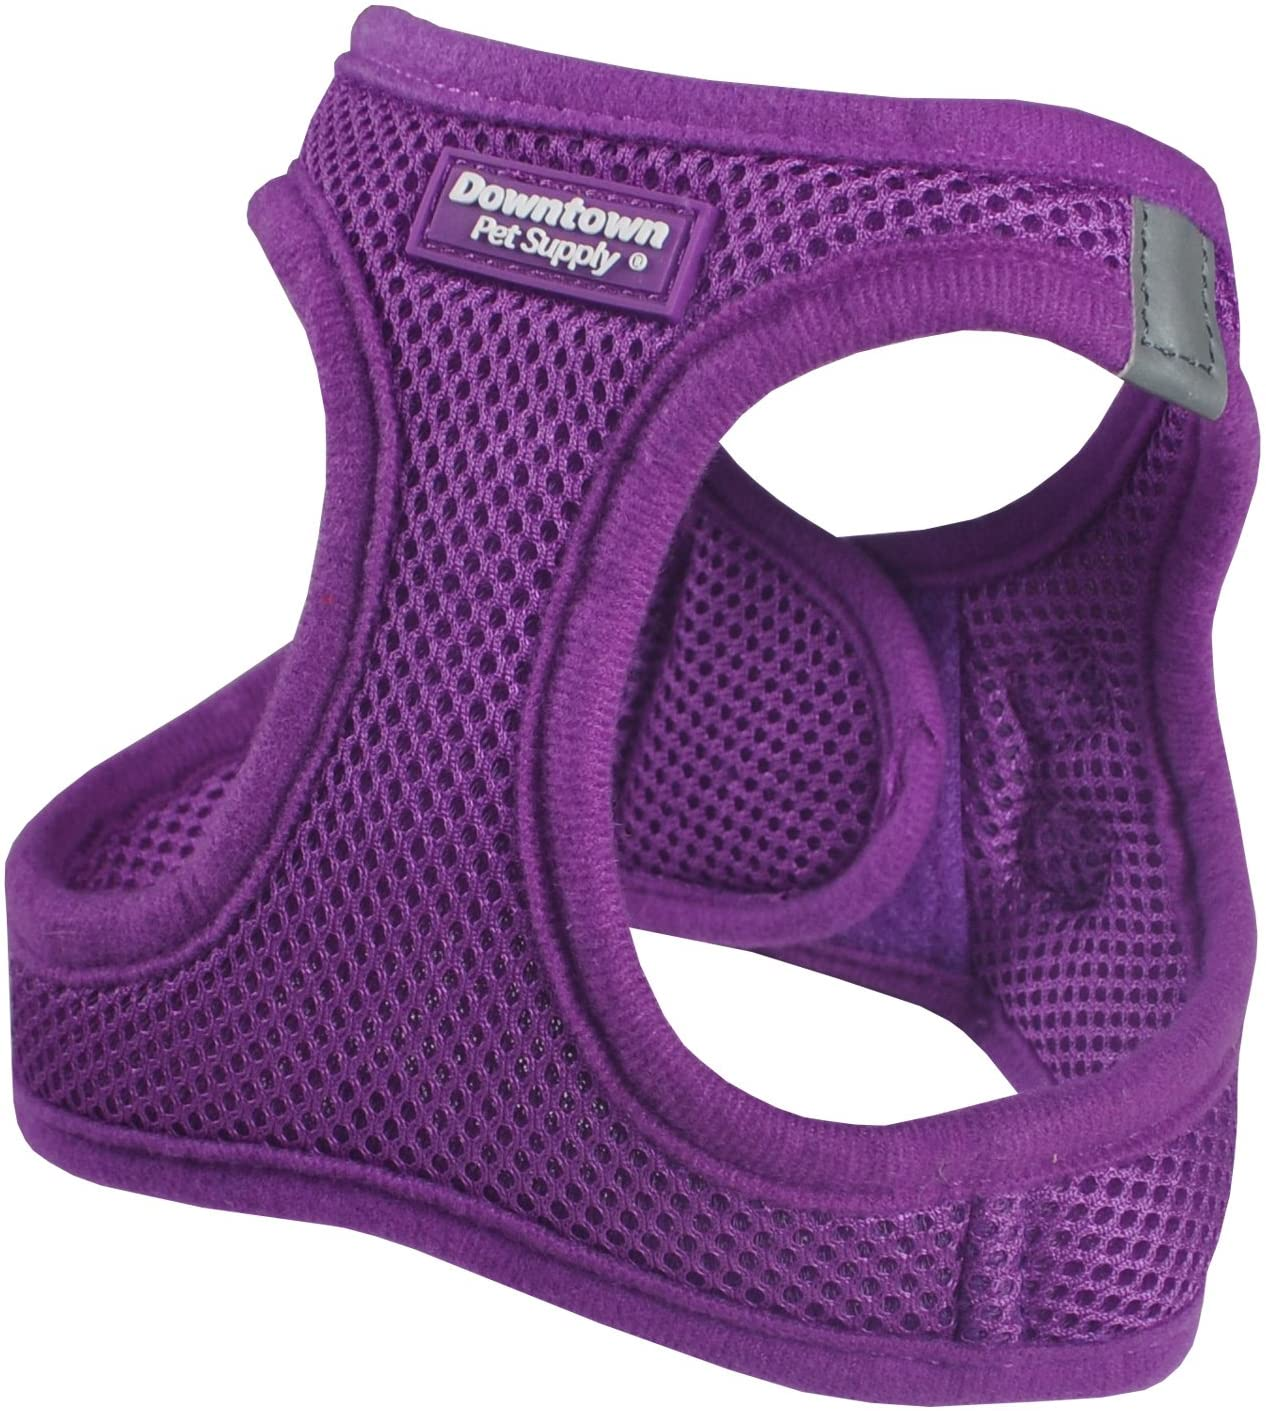 Downtown Pet Supply - Dog Harness for Small, Medium and Large Dogs No-Pull - Step in Dog Harness - Padded Mesh Fabric Dog Vest with Reflective Trim, Velcro and Buckle Straps